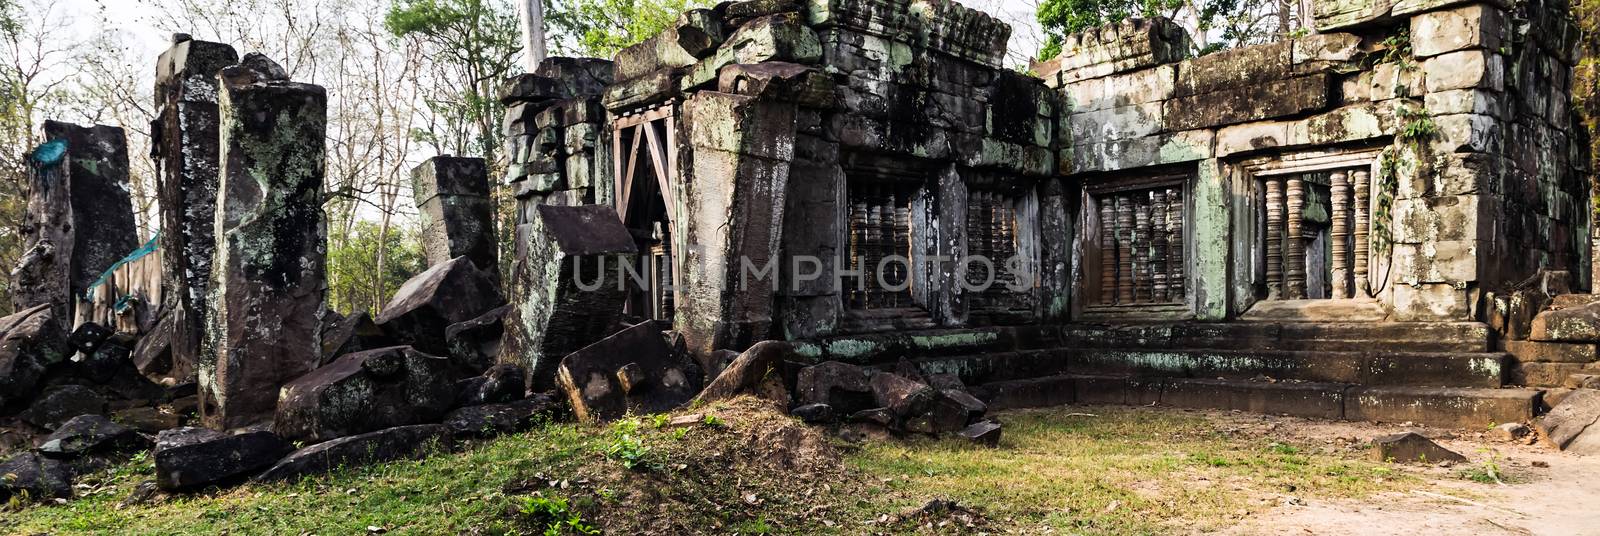 Angkor Wat, Cambodia. Artefakt archeologia Archaeological Landscape of Koh Ker Moss on the stone brick sandstone laterite blocks at the Angkor Wat site in Northwest Cambodia